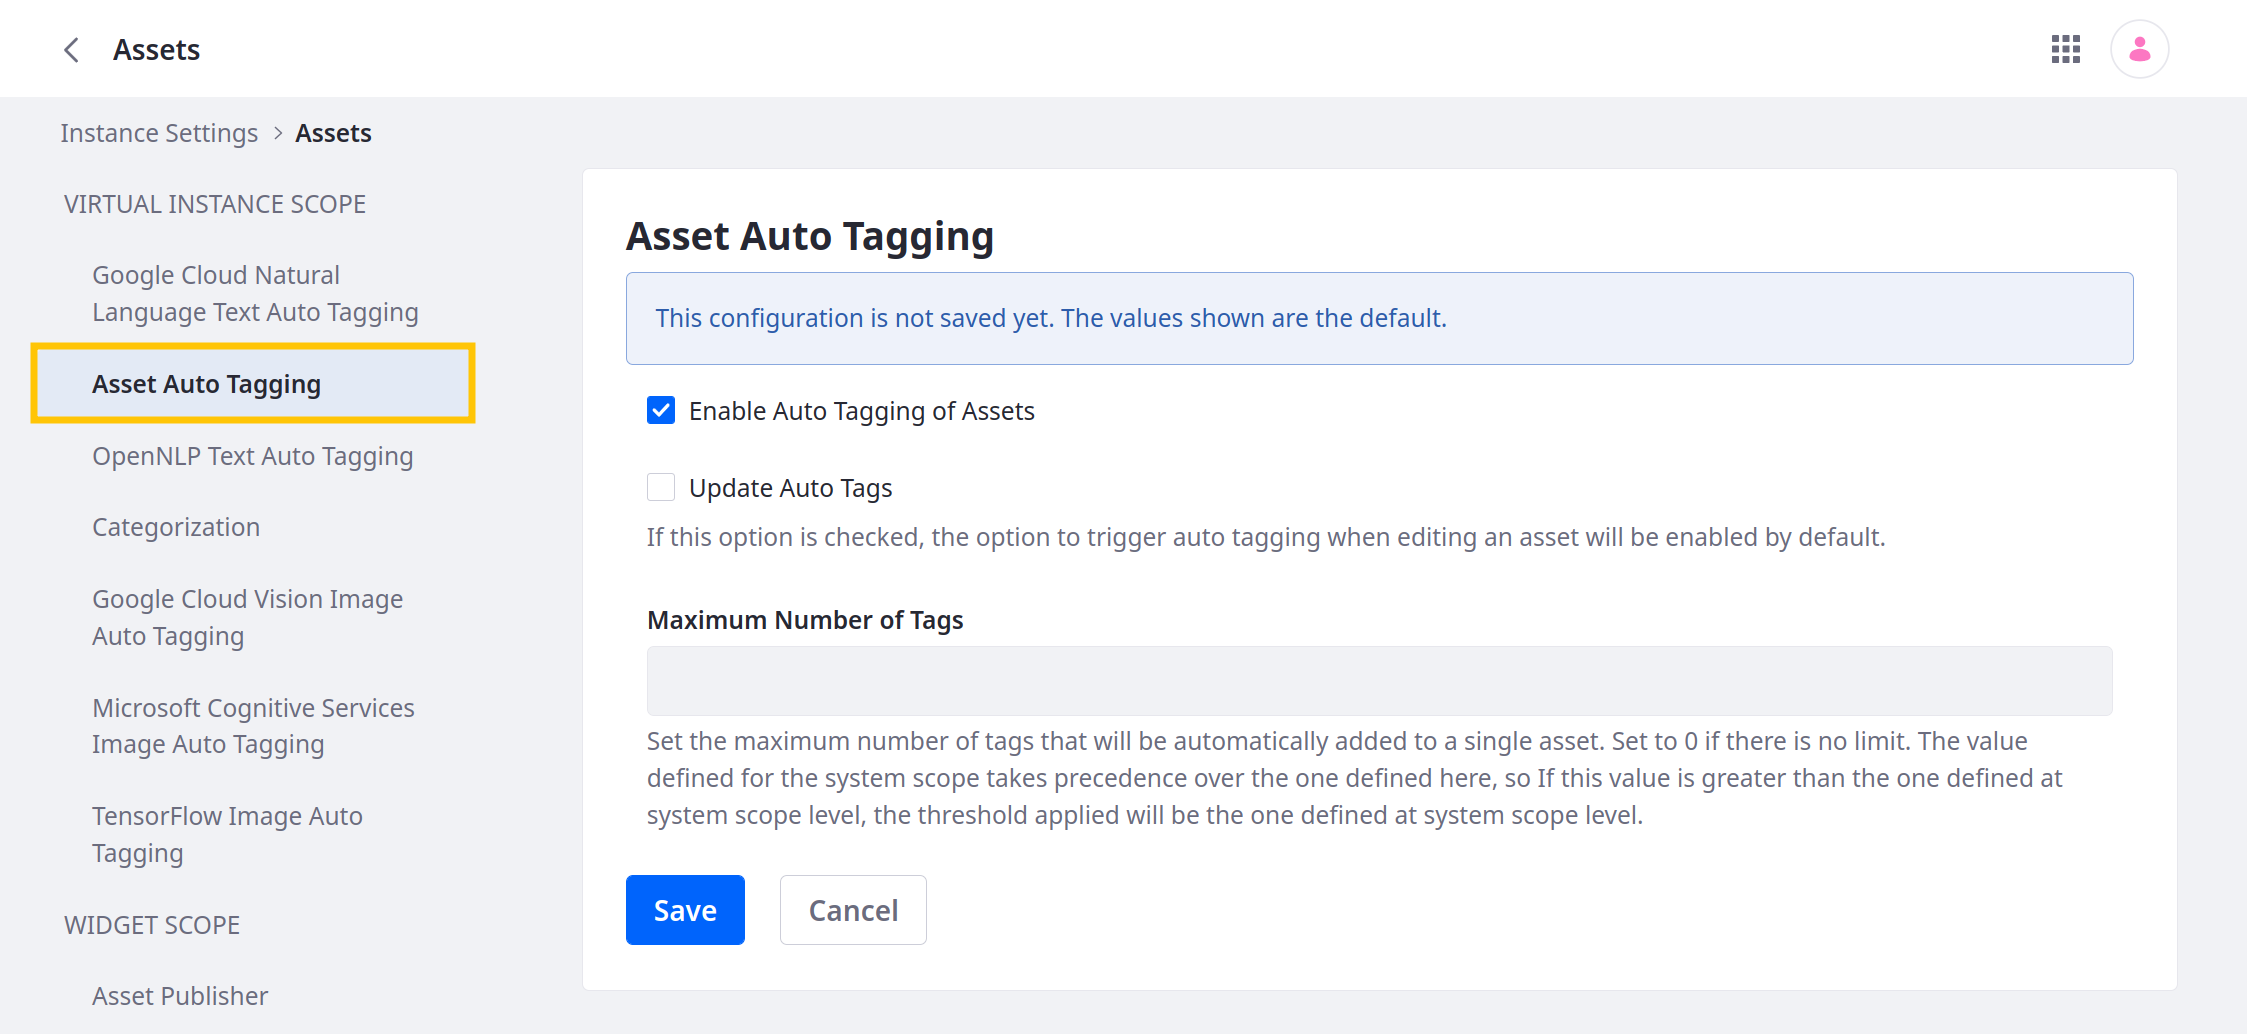 In Instance Settings, click Assets and go to the Asset Auto Tagging tab under Virtual Instance Scope.